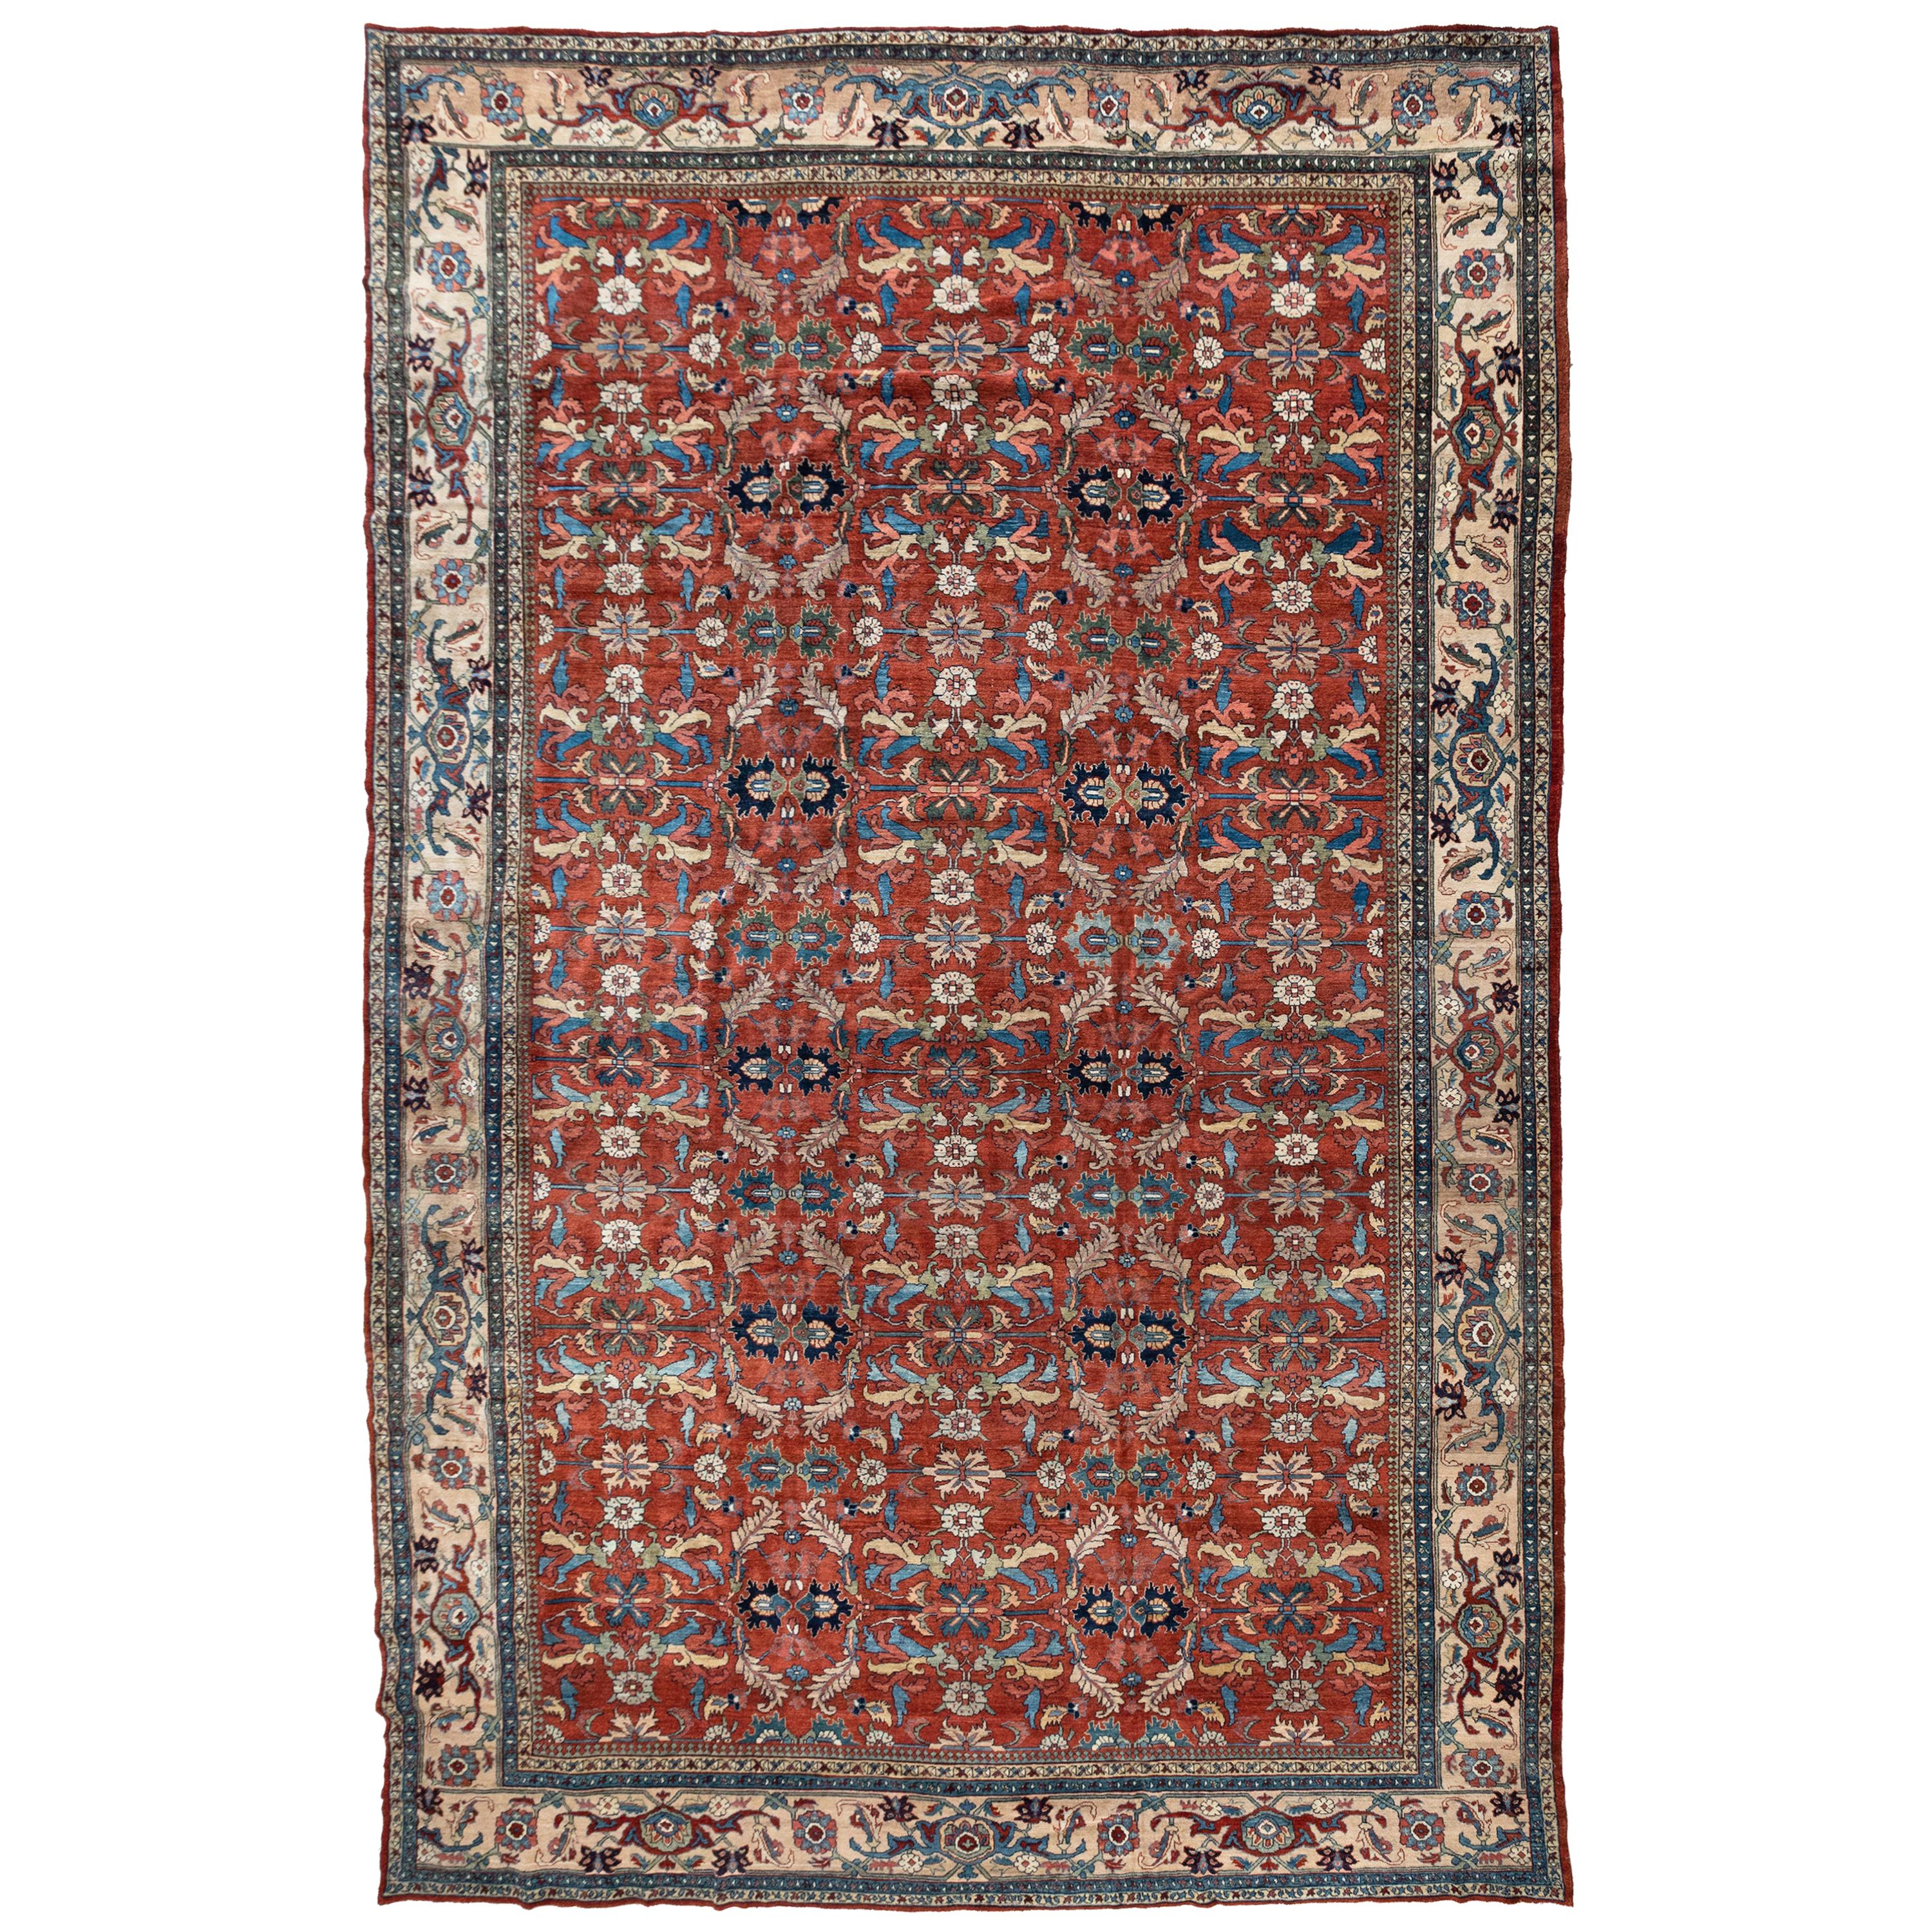 Oversize Large Antique Persian Rust Blue Ivory Mahal Ziegler Rug, circa 1940s For Sale